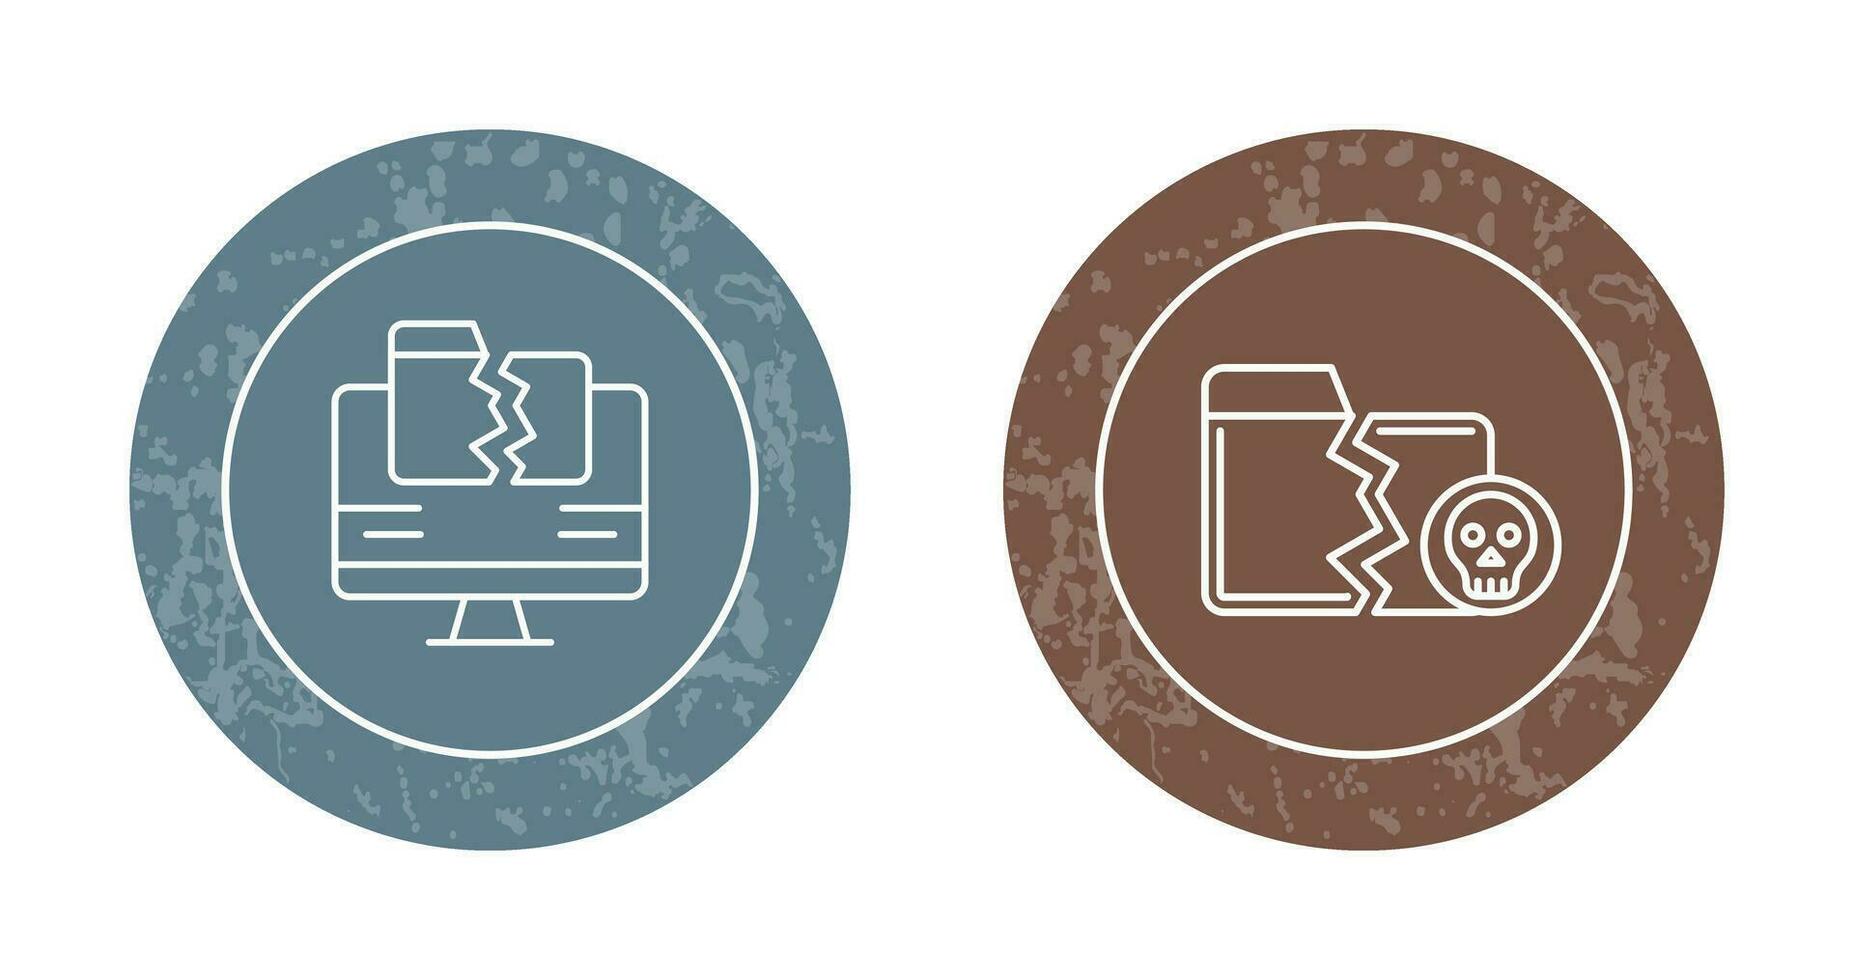 Data Loss and Infected Icon vector